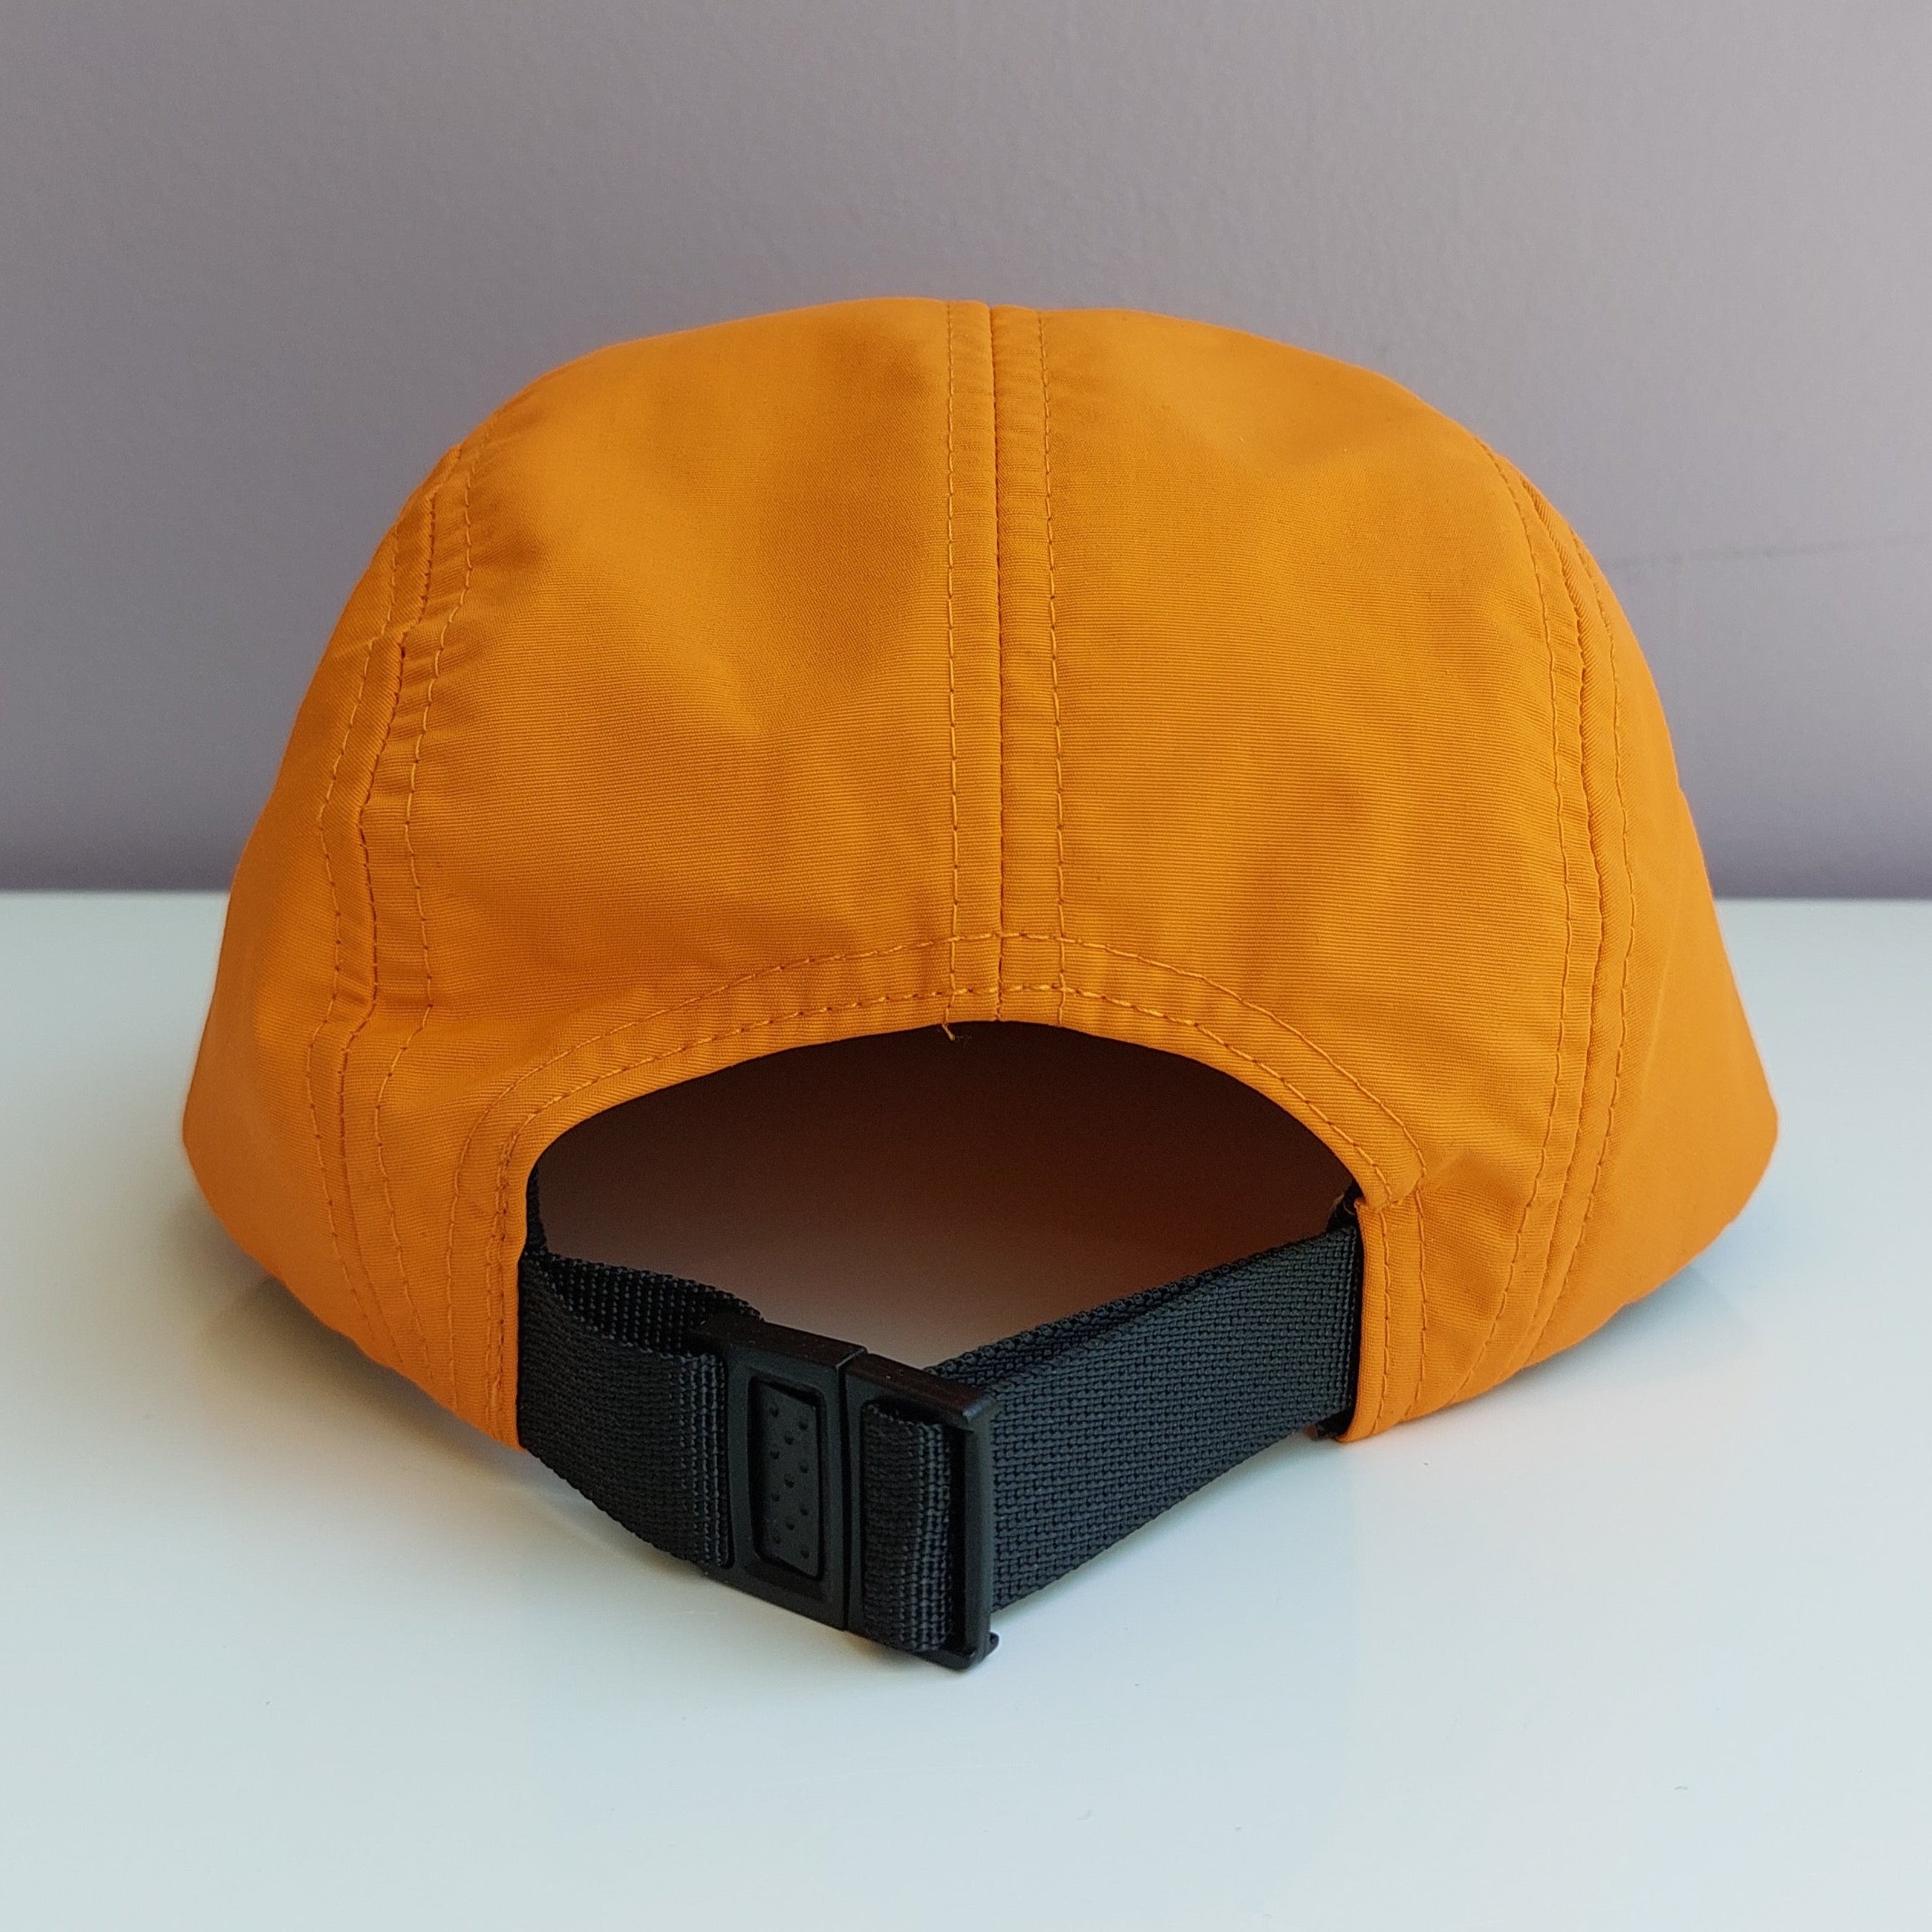 A back view of an orange 5 panel cap with a black adjustable strap sitting on a white surface with a light purple background.